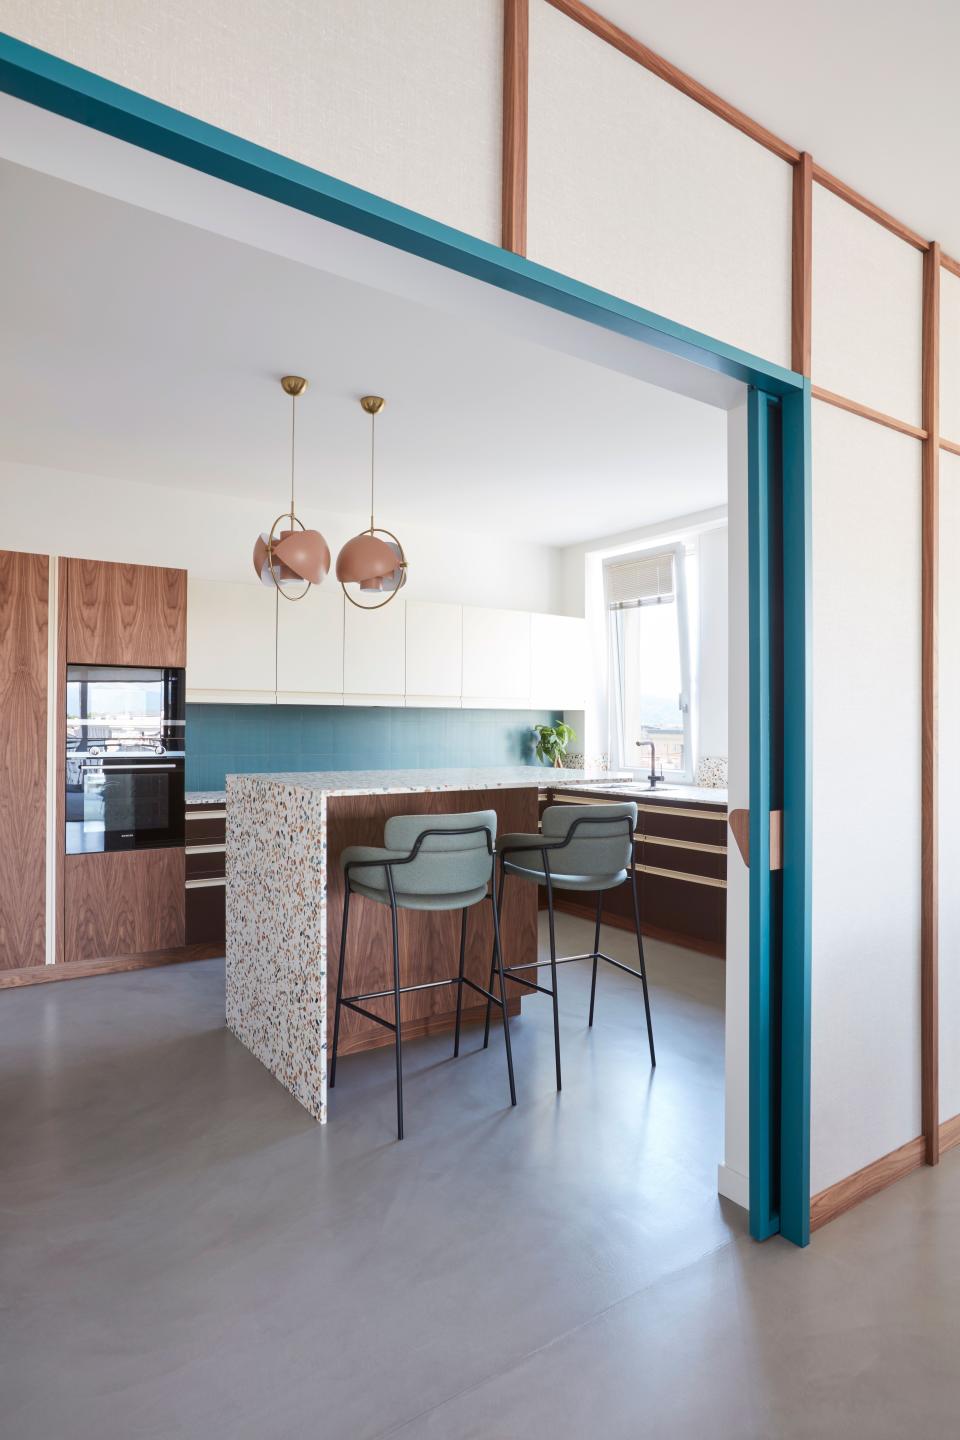 In the kitchen, the use of American walnut helps highlight the blue elements such as the two stools and backsplash. The central island is covered with terrazzo by Agglotech.